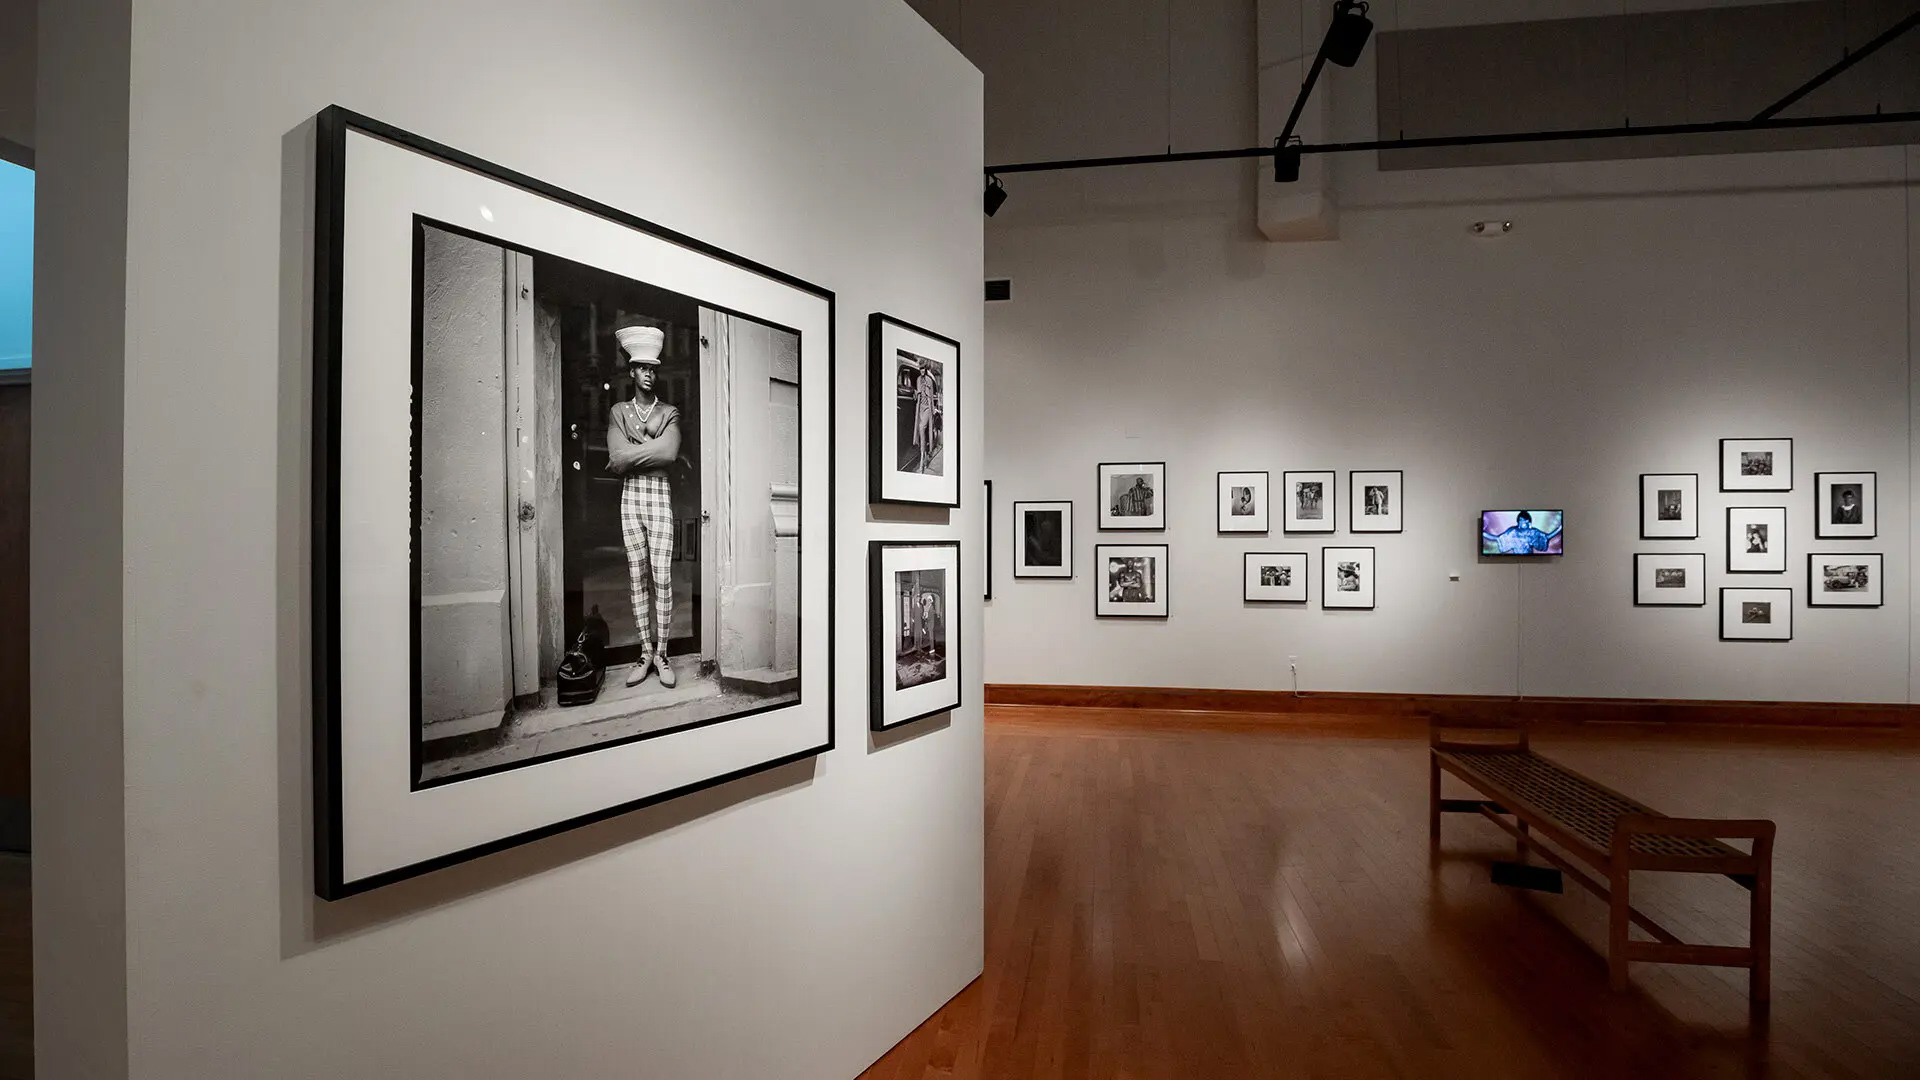 A photo exhibition at the David C. Driskell Center explores depictions of African and African American beauty. The center received two grants worth nearly $600,000 to document the center's activities and to catalog and digitize recent acquisitions.